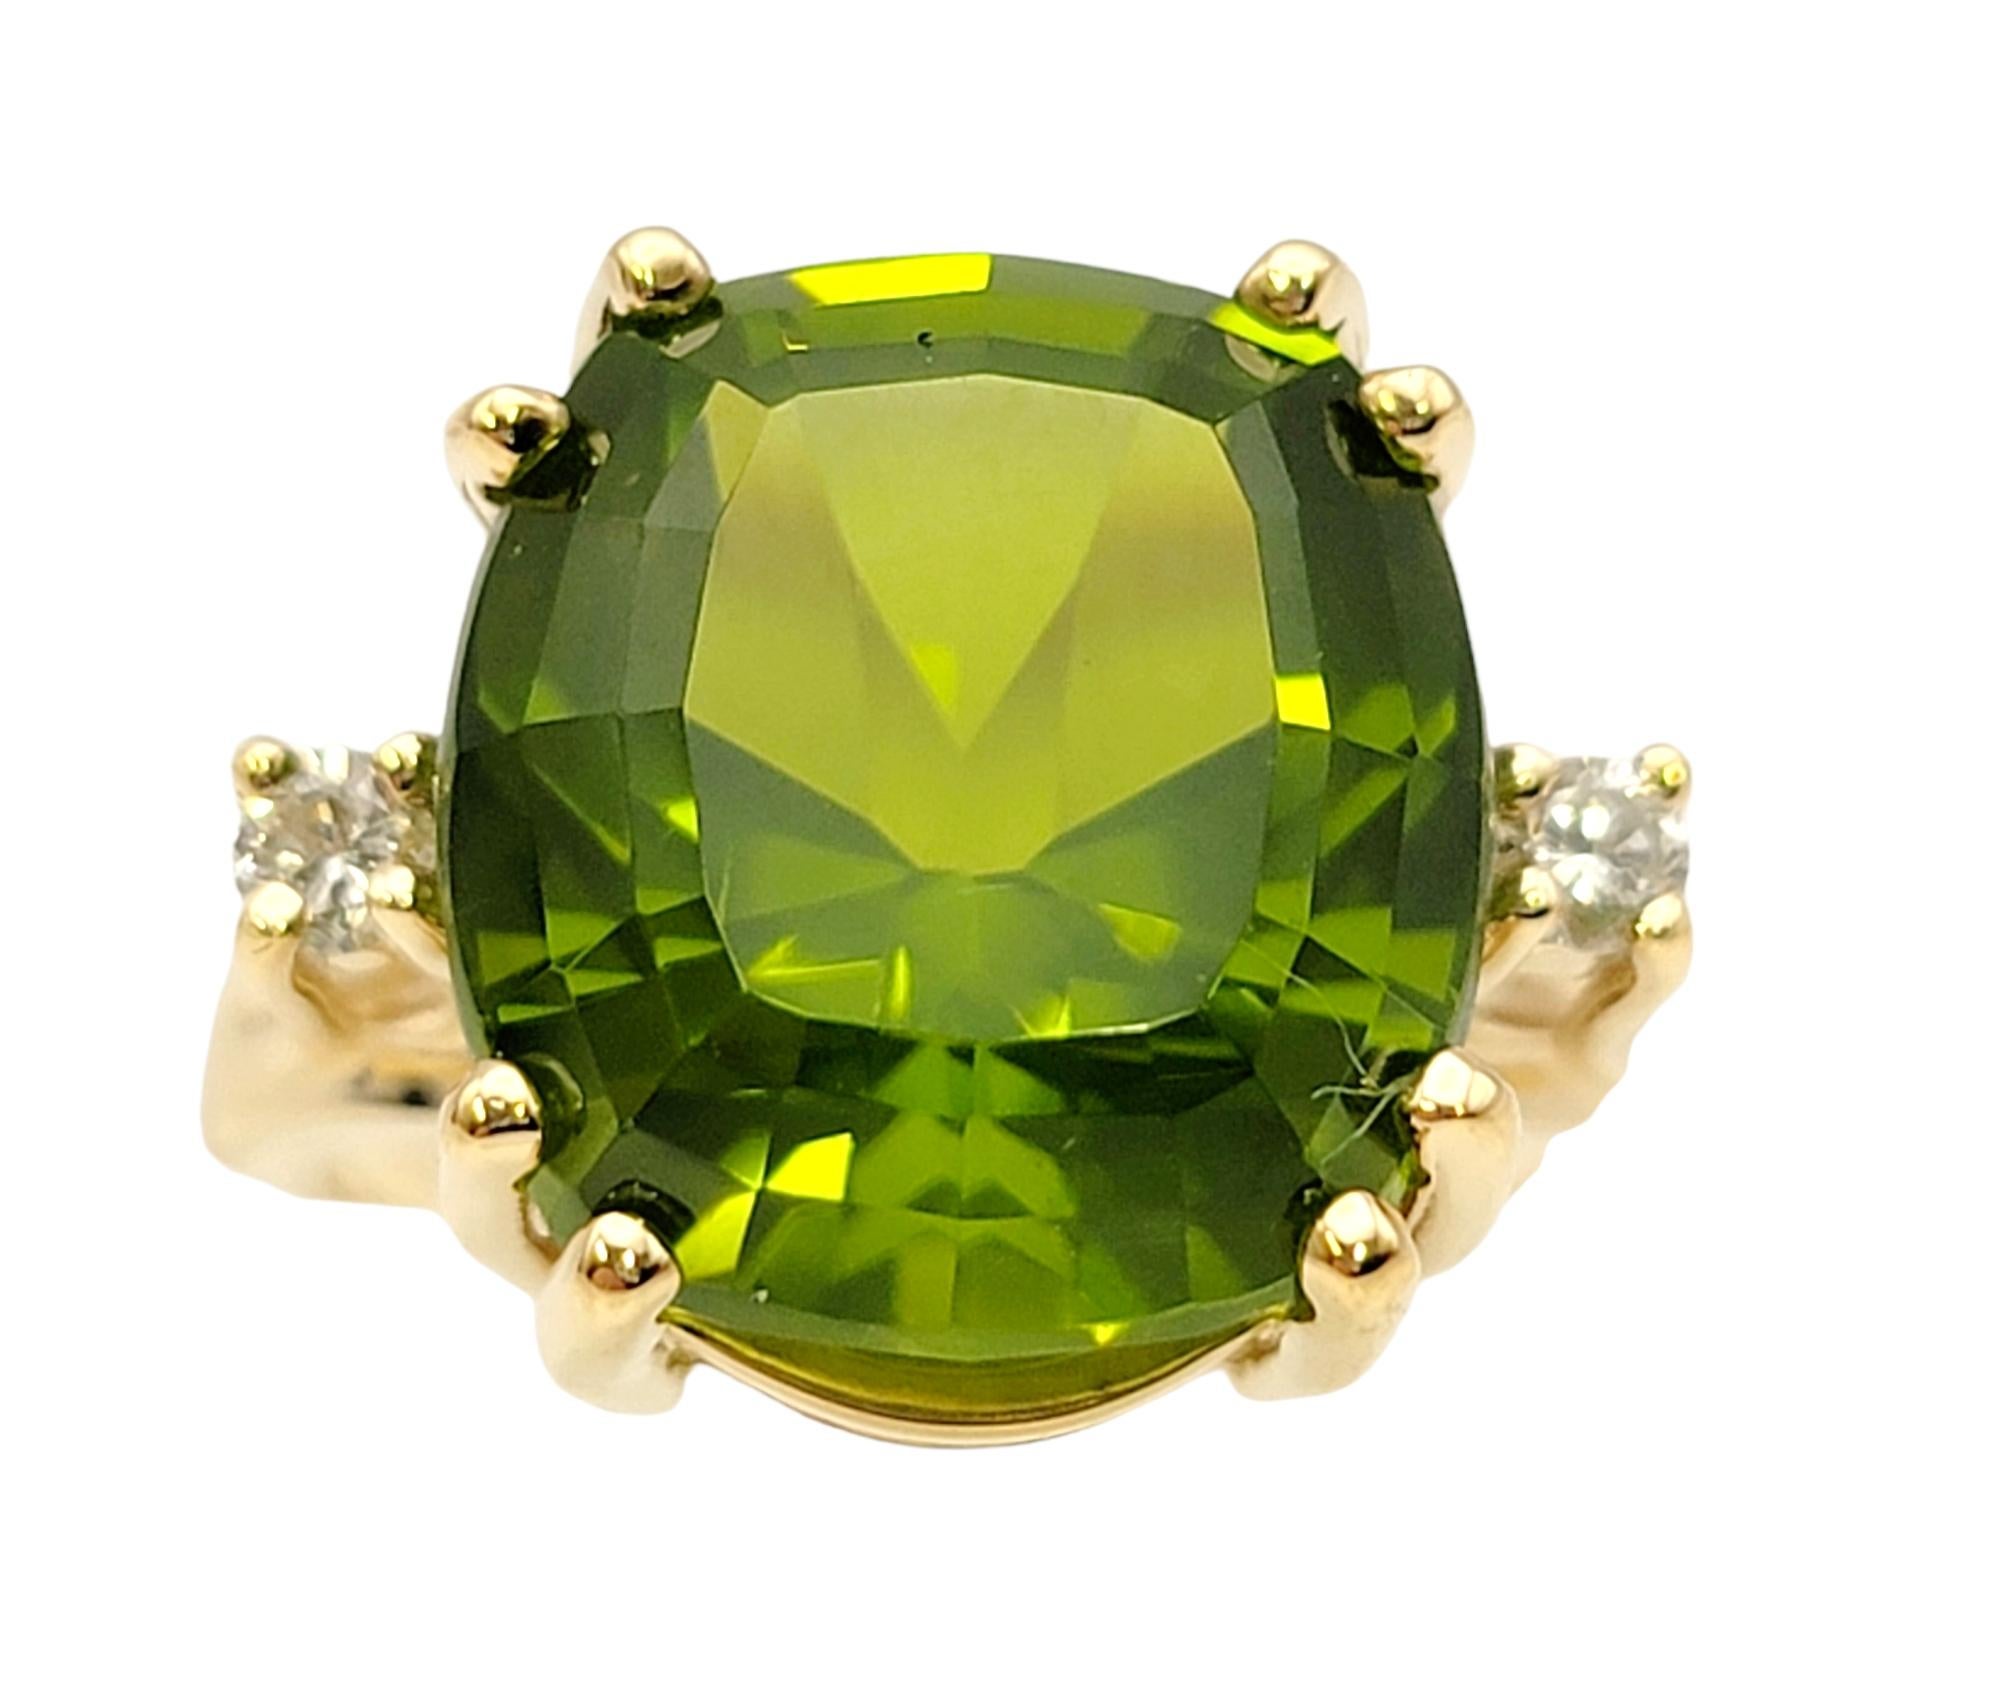 Ring size: 6

Bold and beautiful peridot and diamond cocktail ring. This eye-catching piece makes a big statement with its impressive size and bright color. The incredible cushion cut peridot stone is 8 prong set in 14 karat yellow gold and arranged